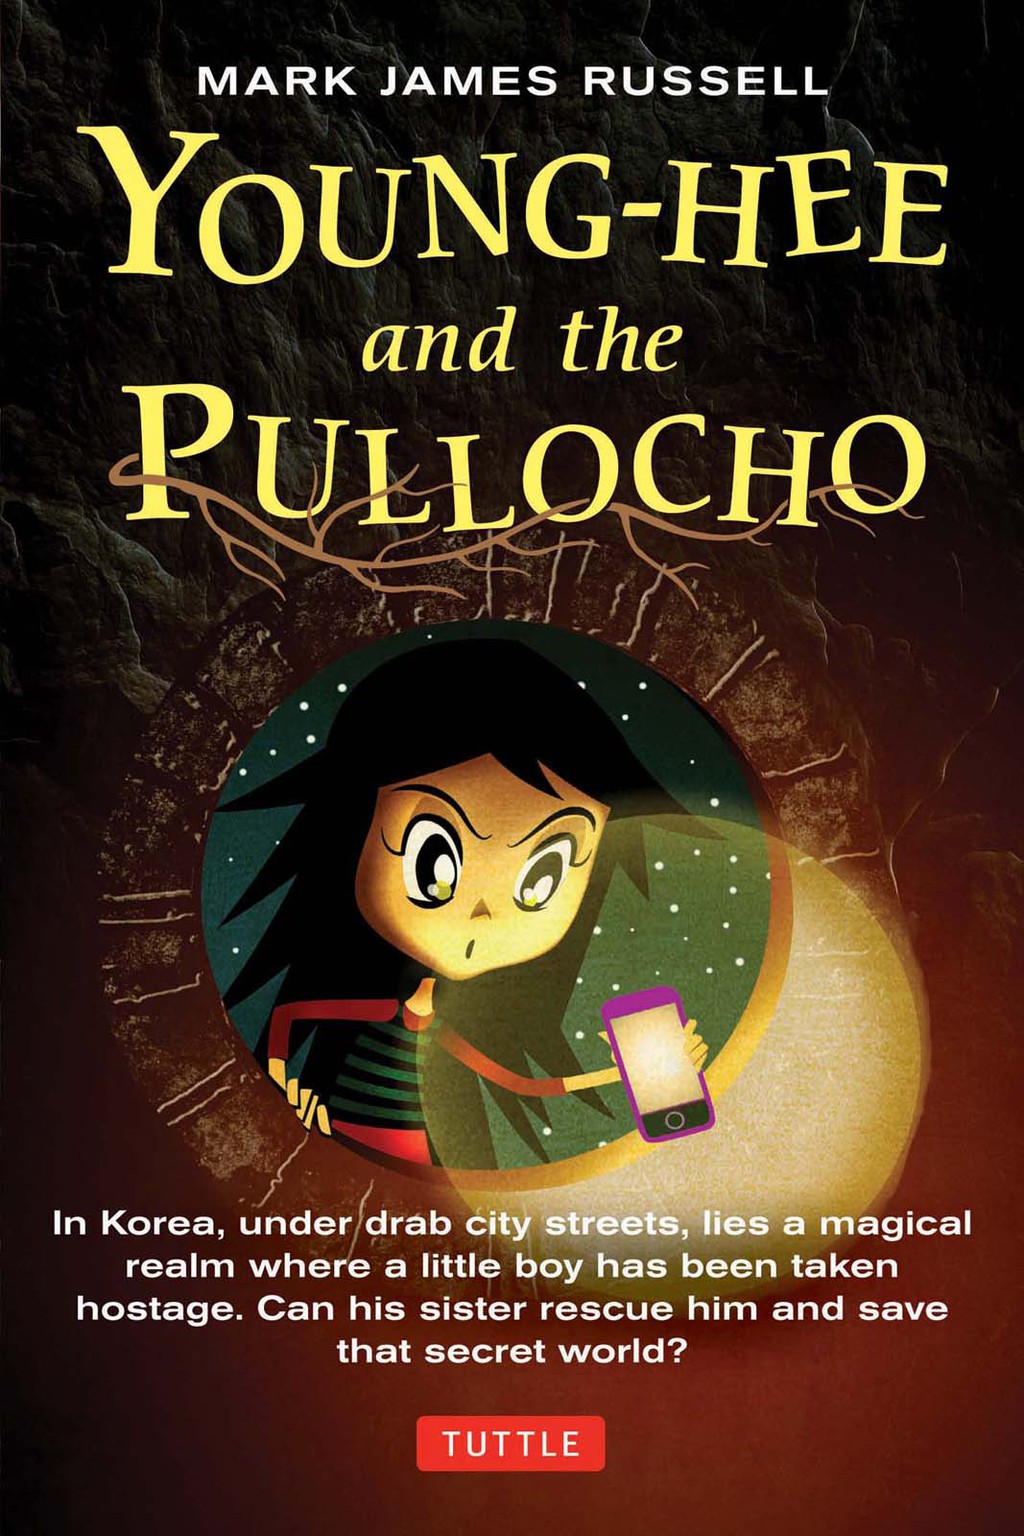 Young-hee and the Pullocho (eBook) - Mark James Russell